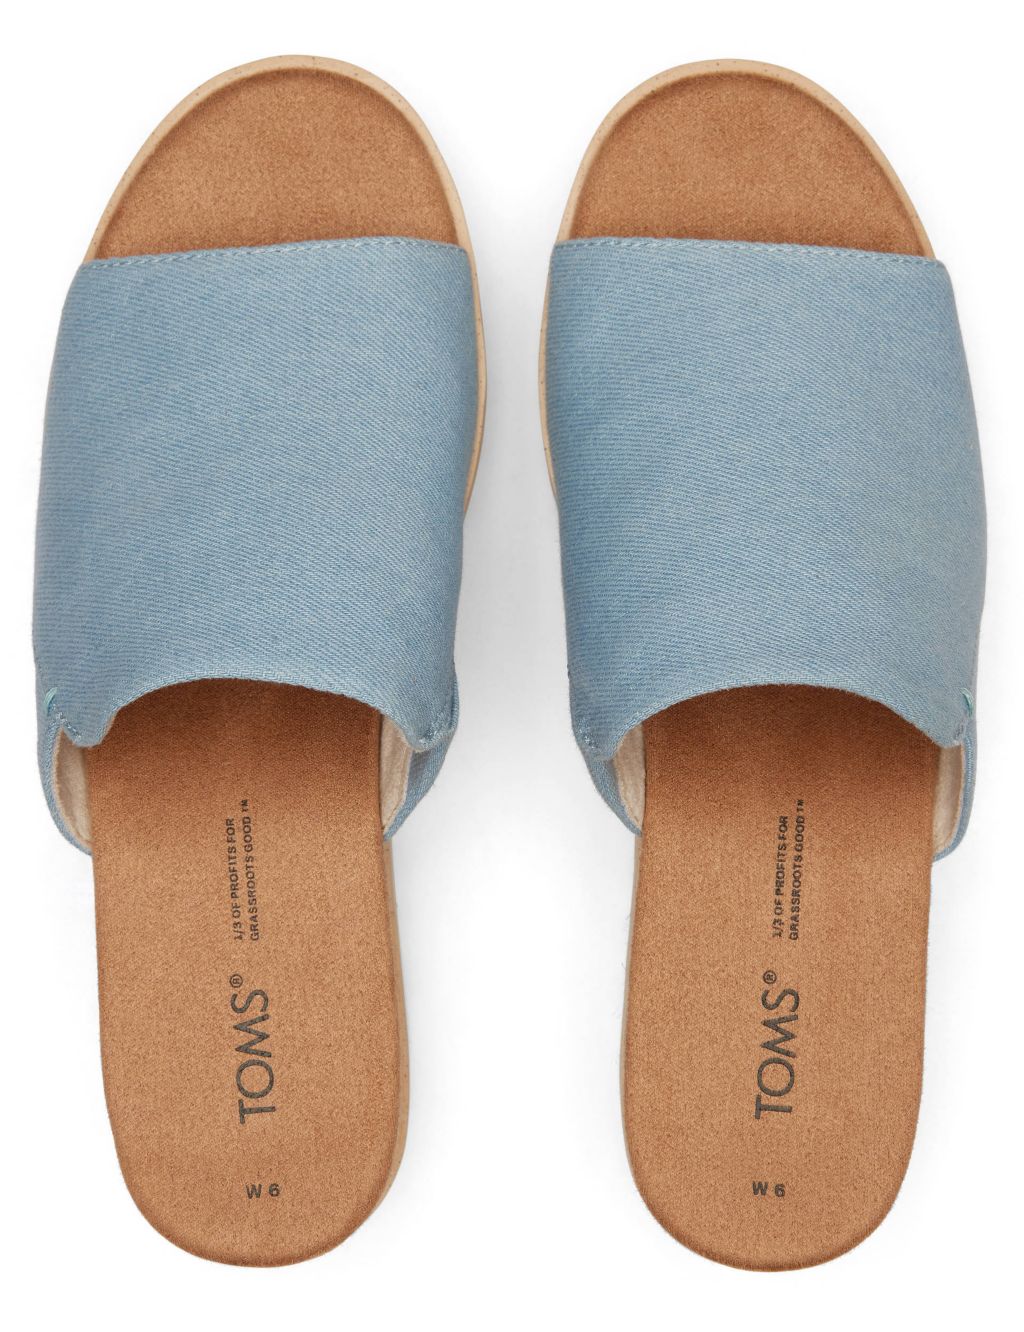 Canvas Wedge Mules image 5